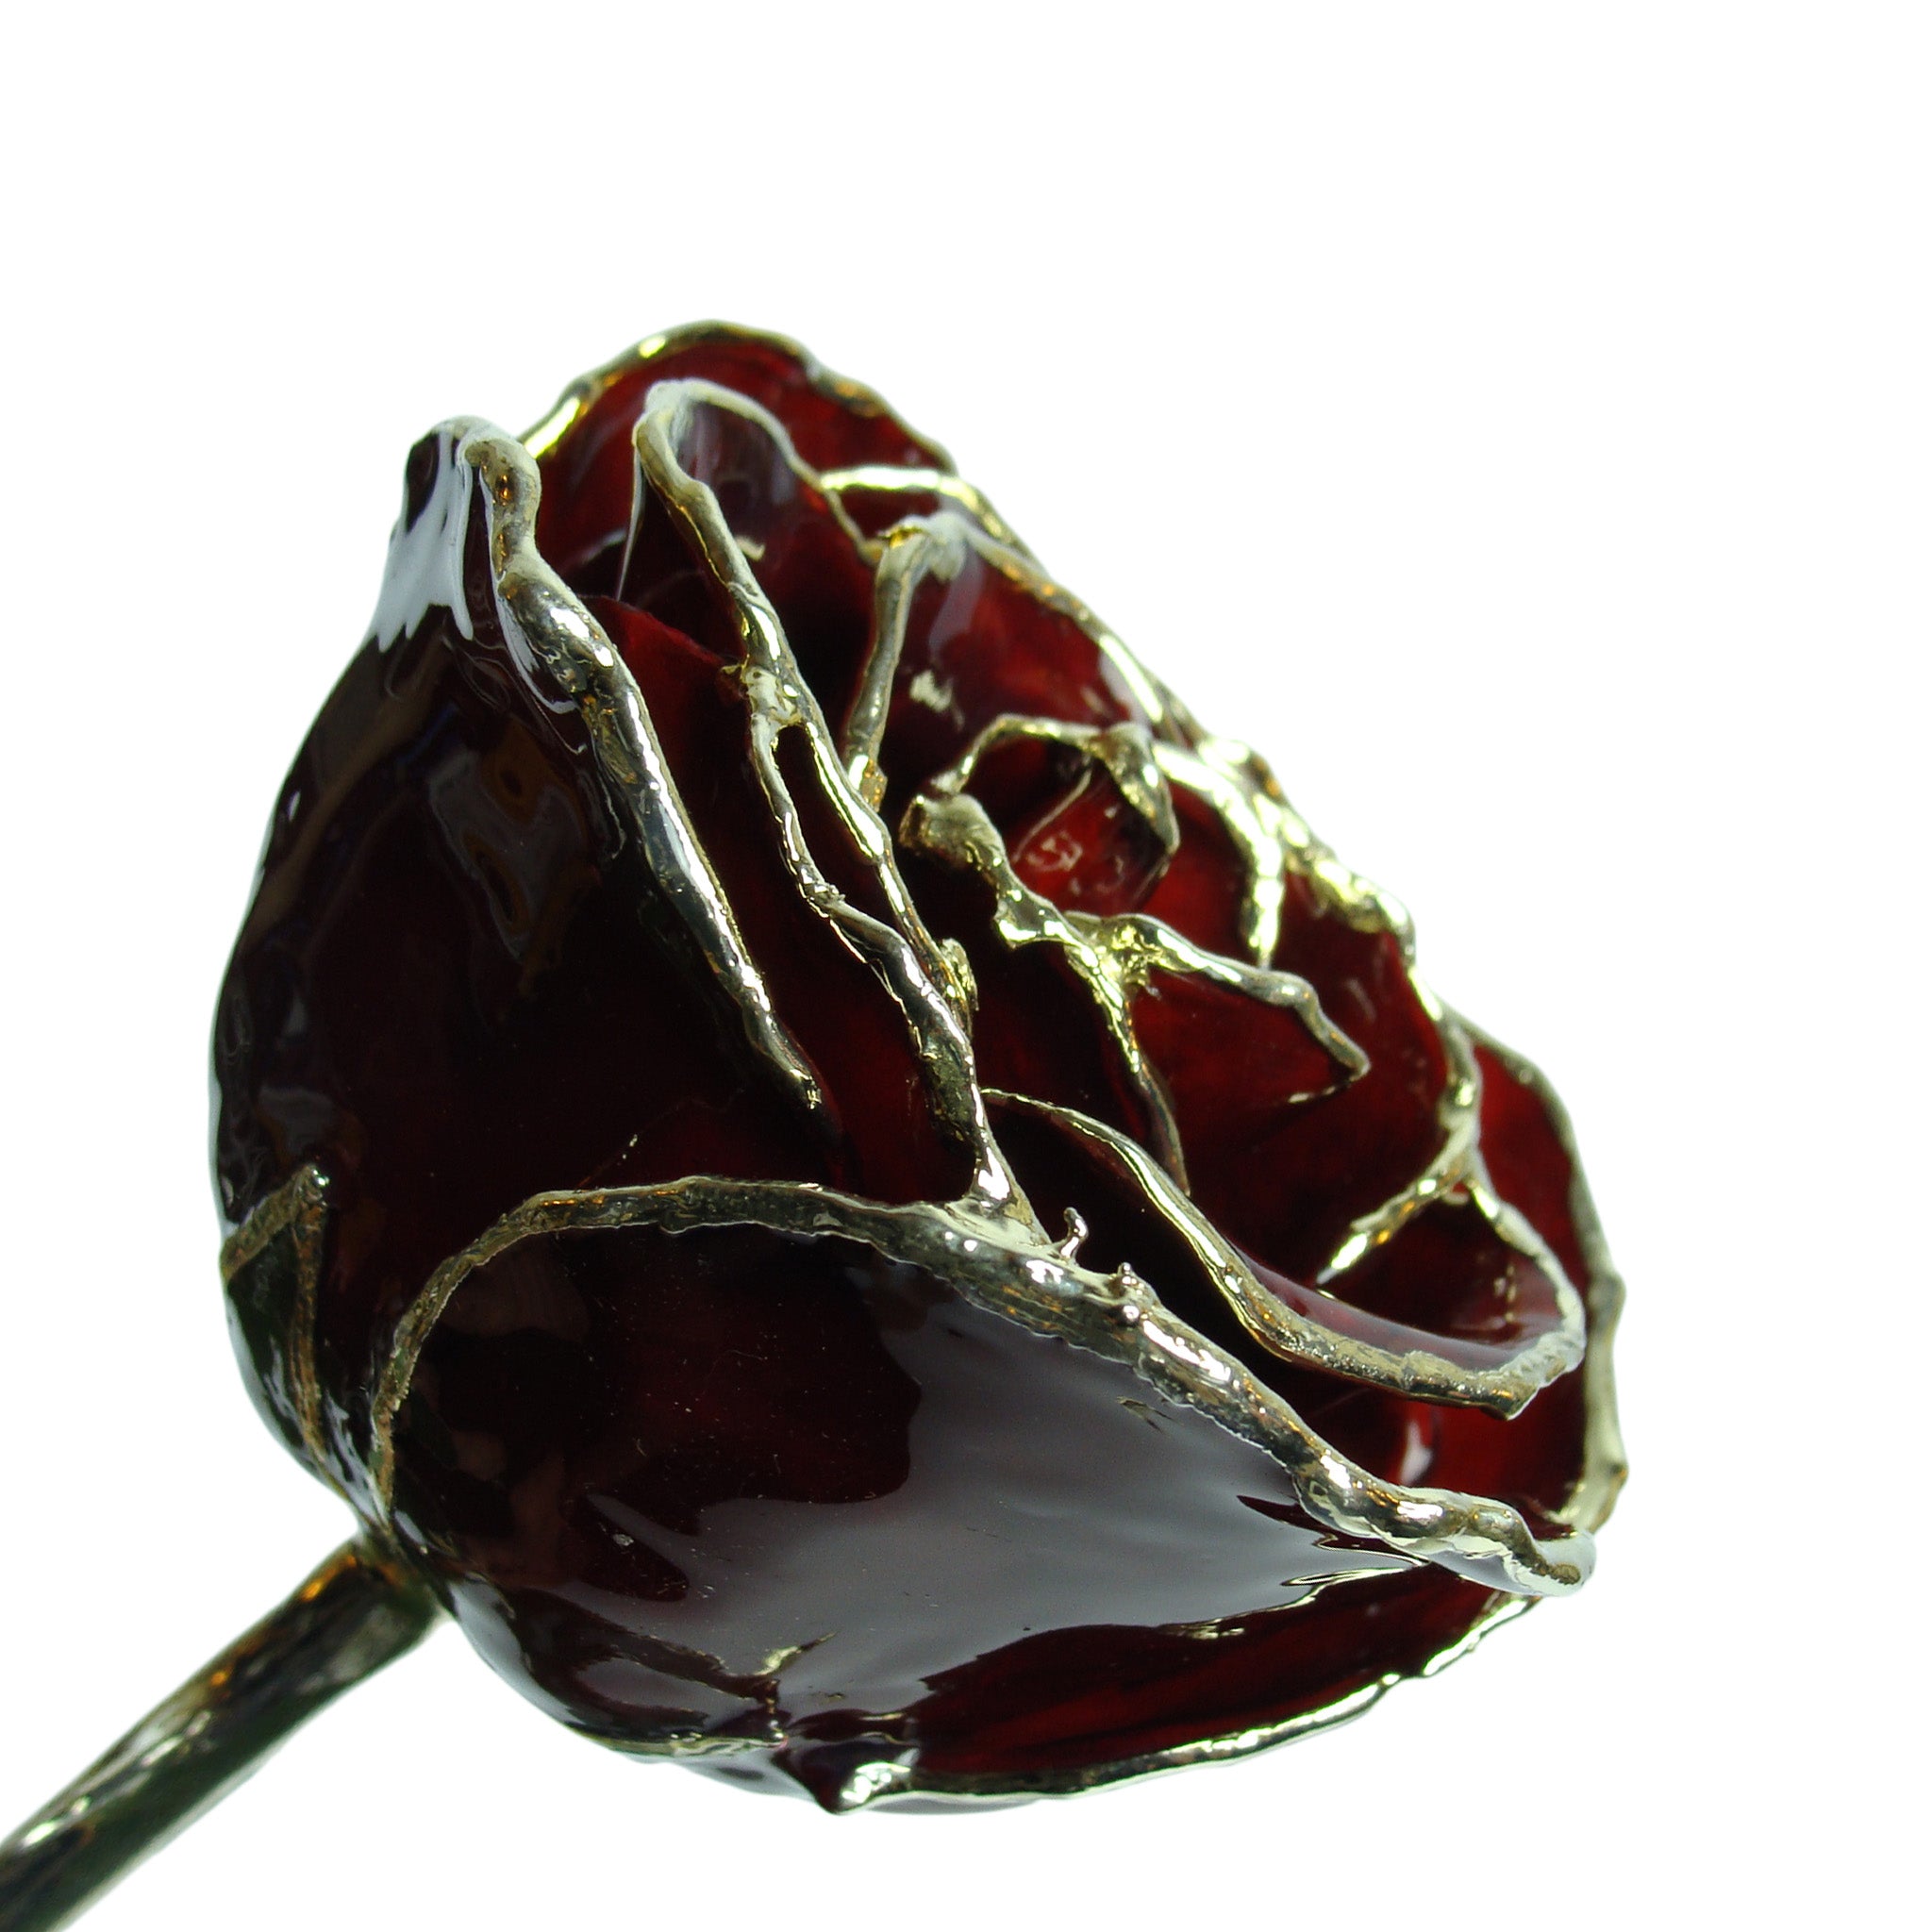 Silver Trimmed Forever Rose with Burgundy Petals. View of Stem, Leaves, and Rose Petals and Showing Detail of Silver Trim